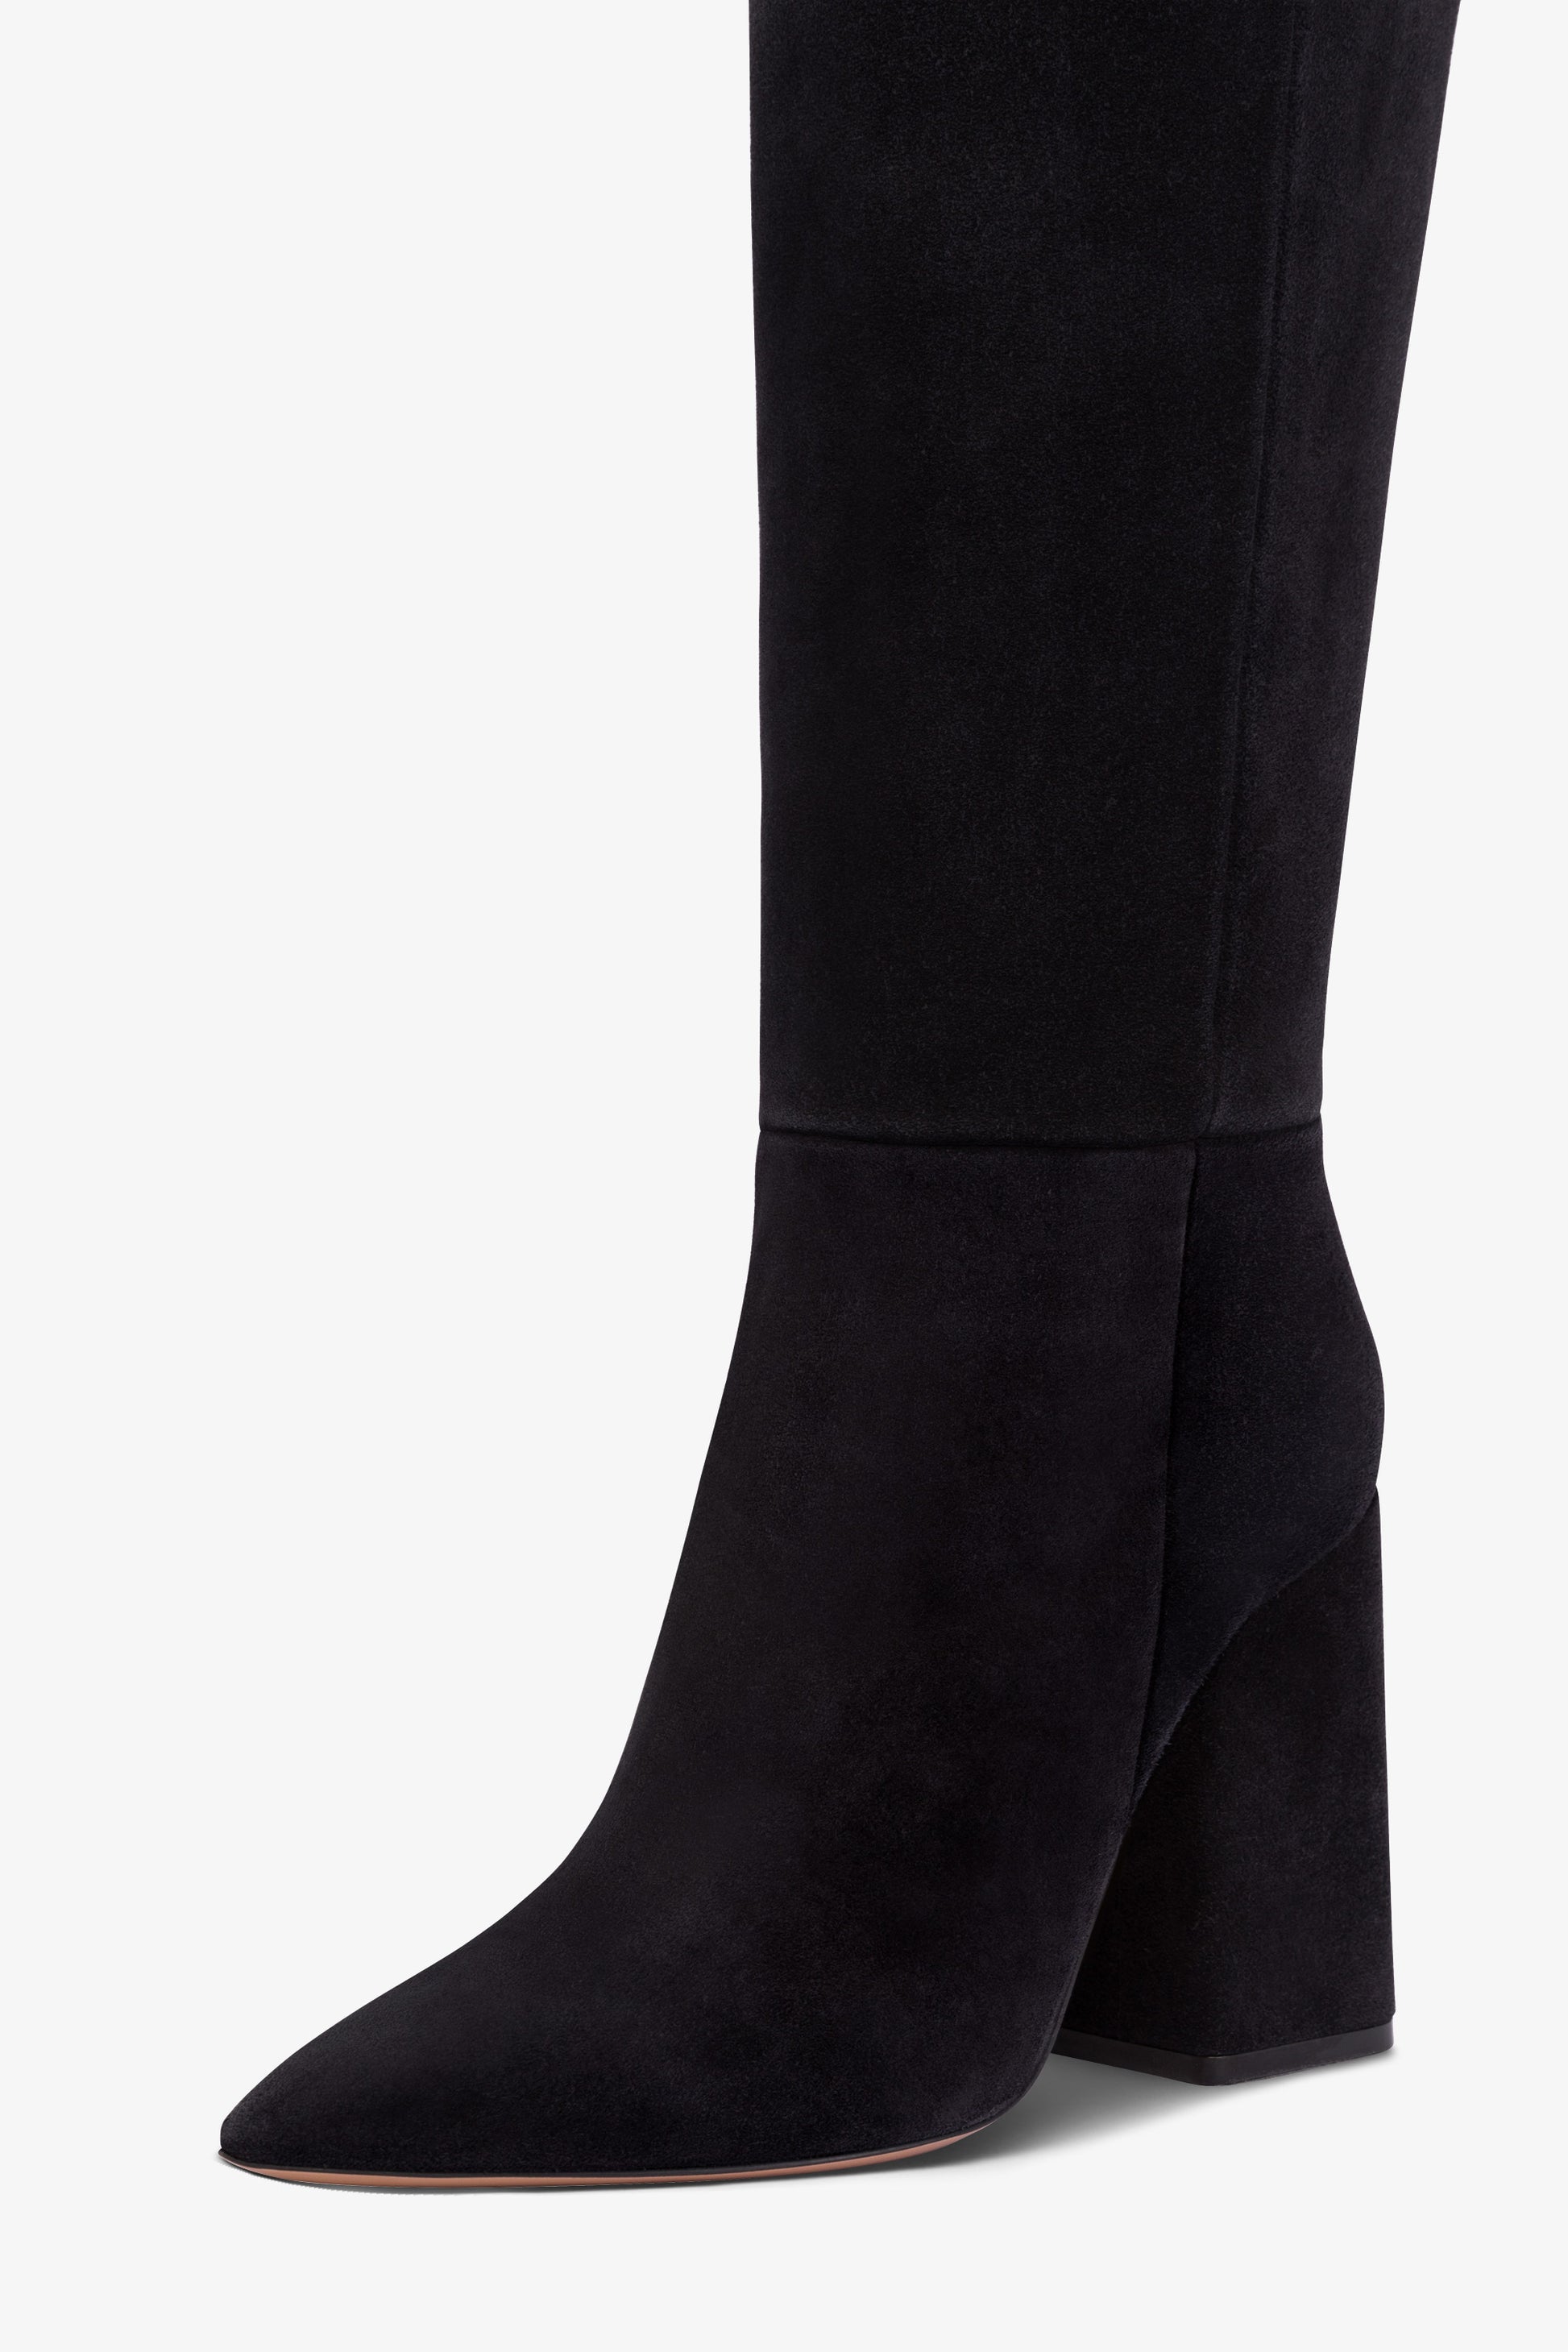 Over-the-knee, long pointed boots in soft off-black suede leather